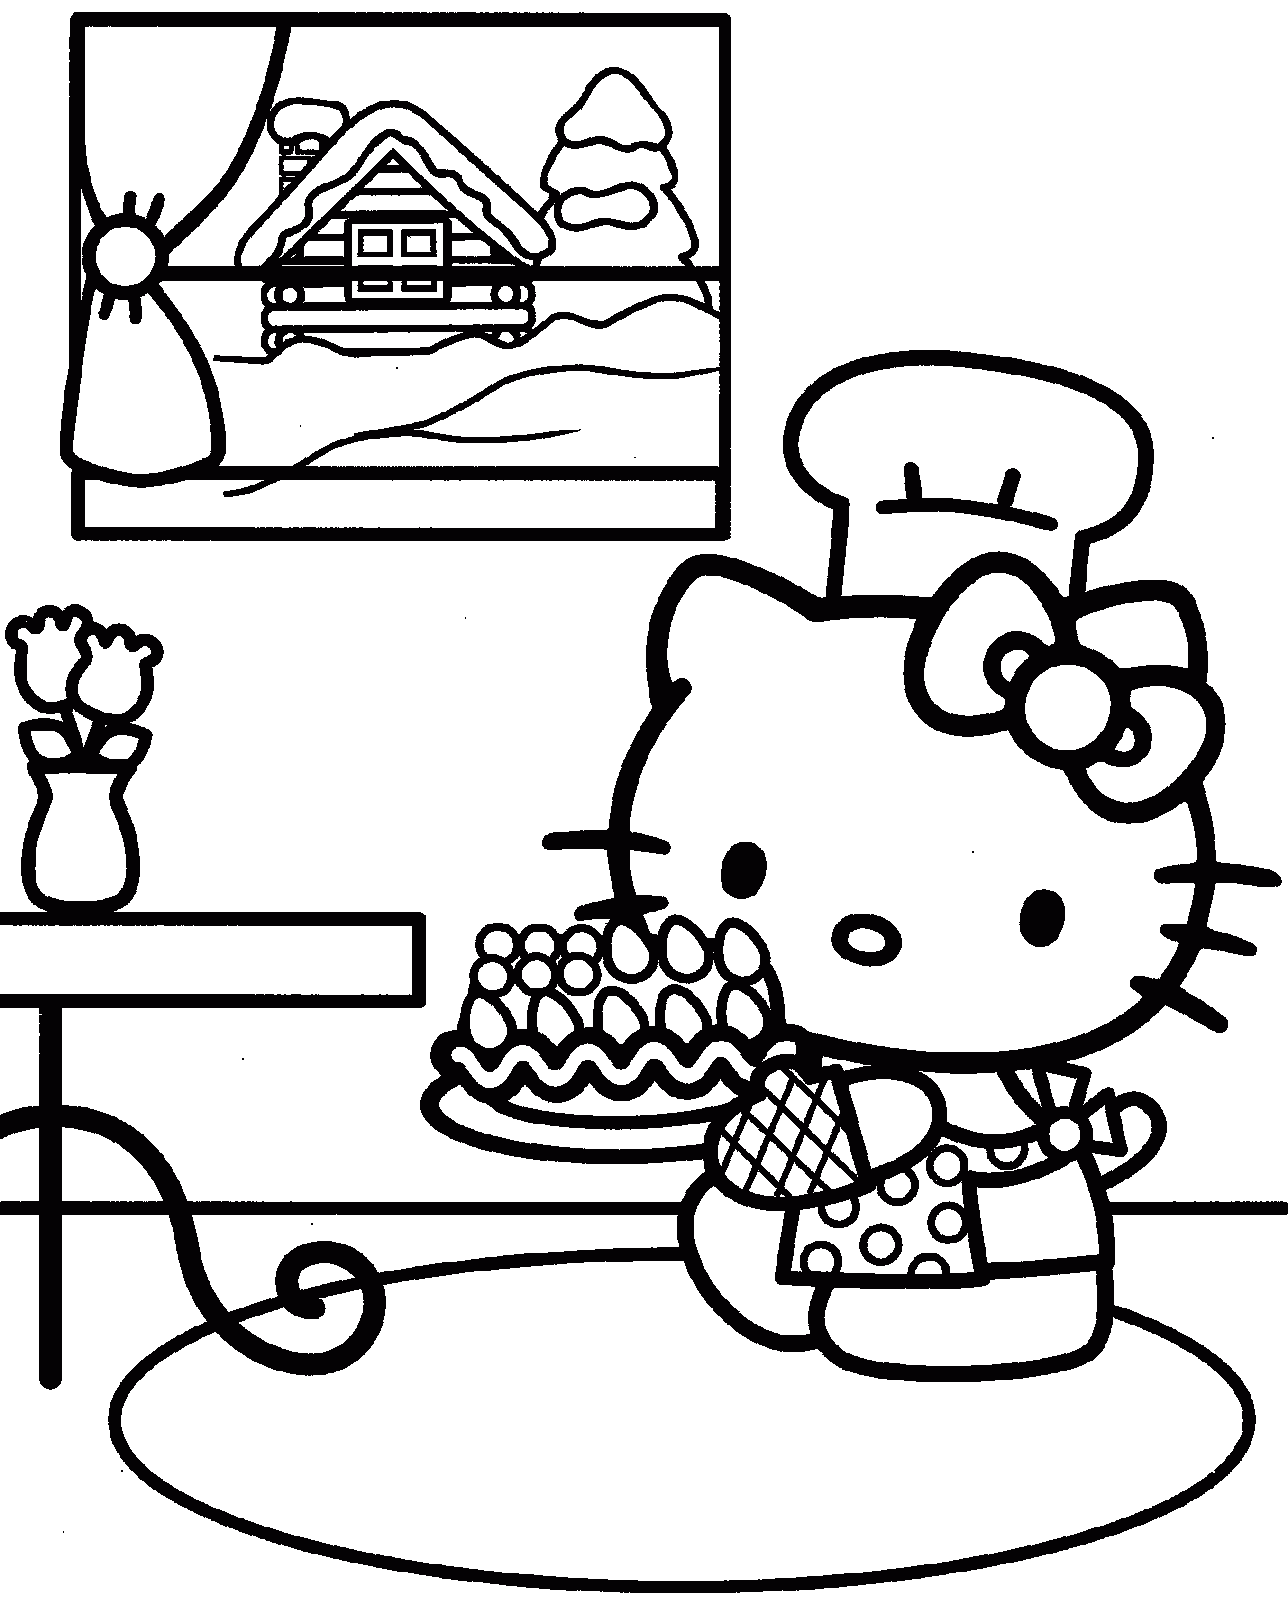 Download Hello Kitty Coloring Pages #2 | Hello Kitty Forever